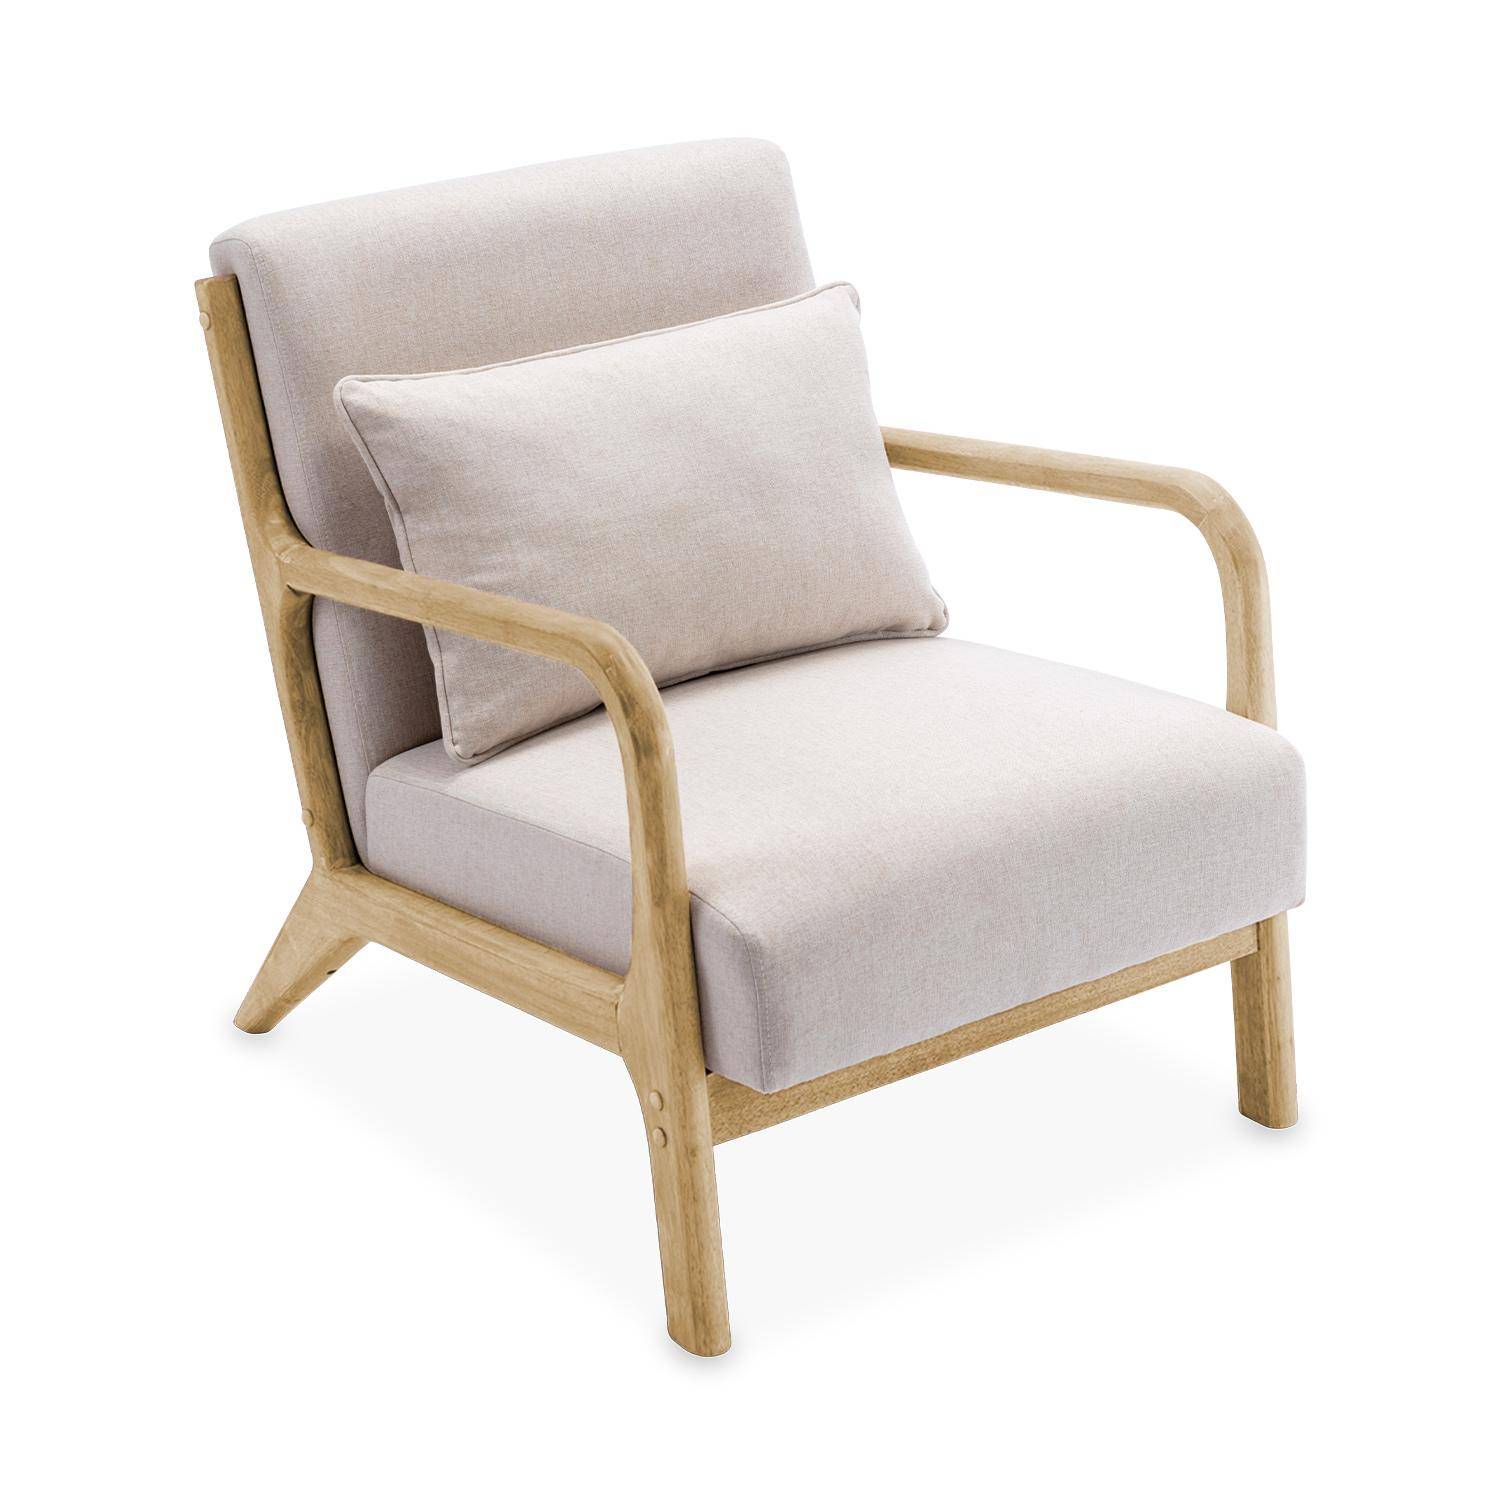 Wooden armchair with scandi-style compass legs and cushion - Lorens - Beige,sweeek,Photo4